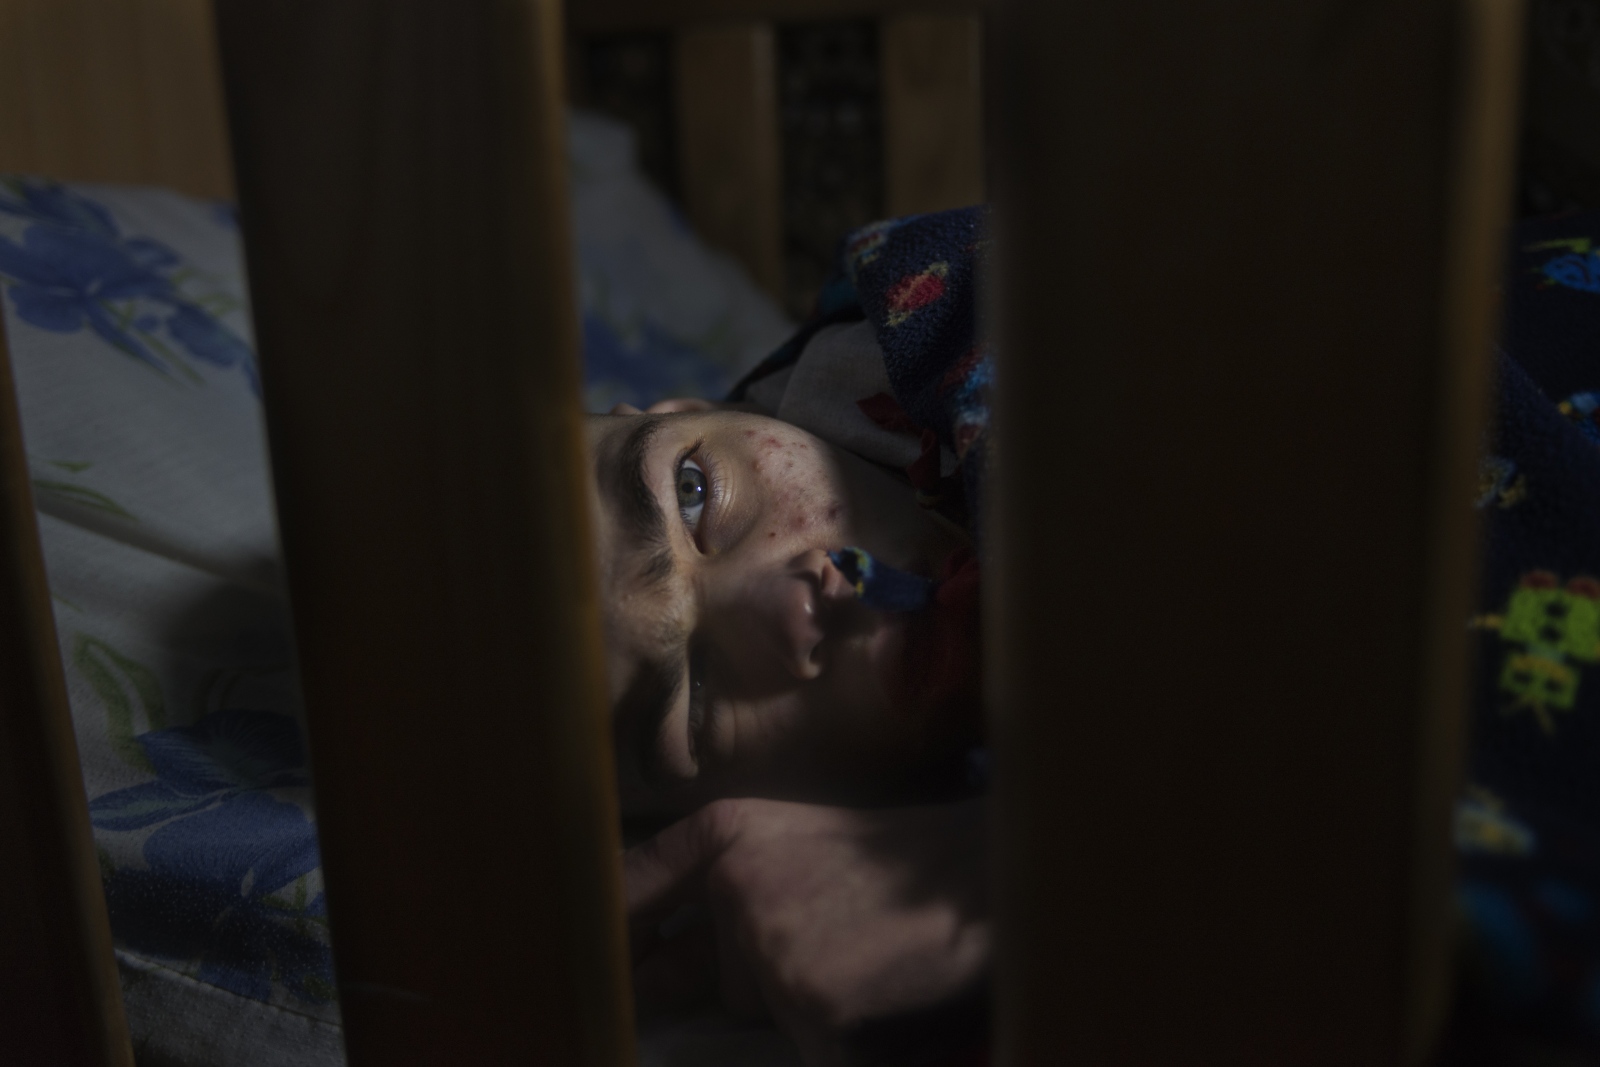 Pitomnik: Ukraine's forgotten - This 19 year old boy spends his entire life in bed. He...